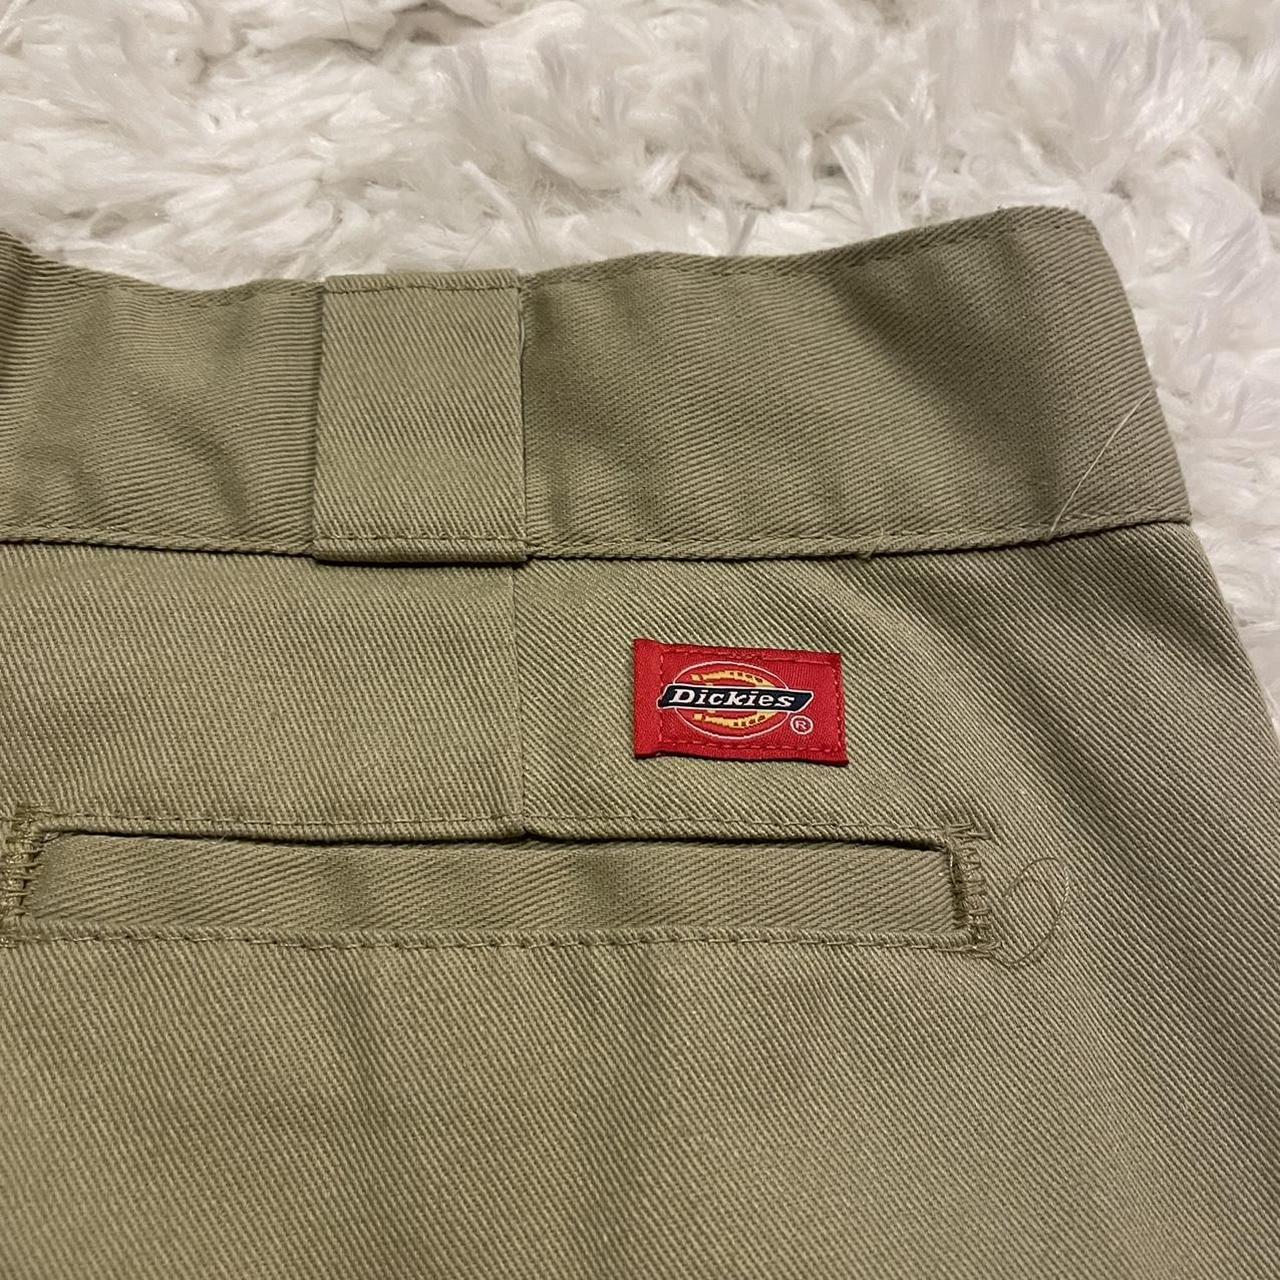 lowrise dickies, -774 original fit, -tagged as a size